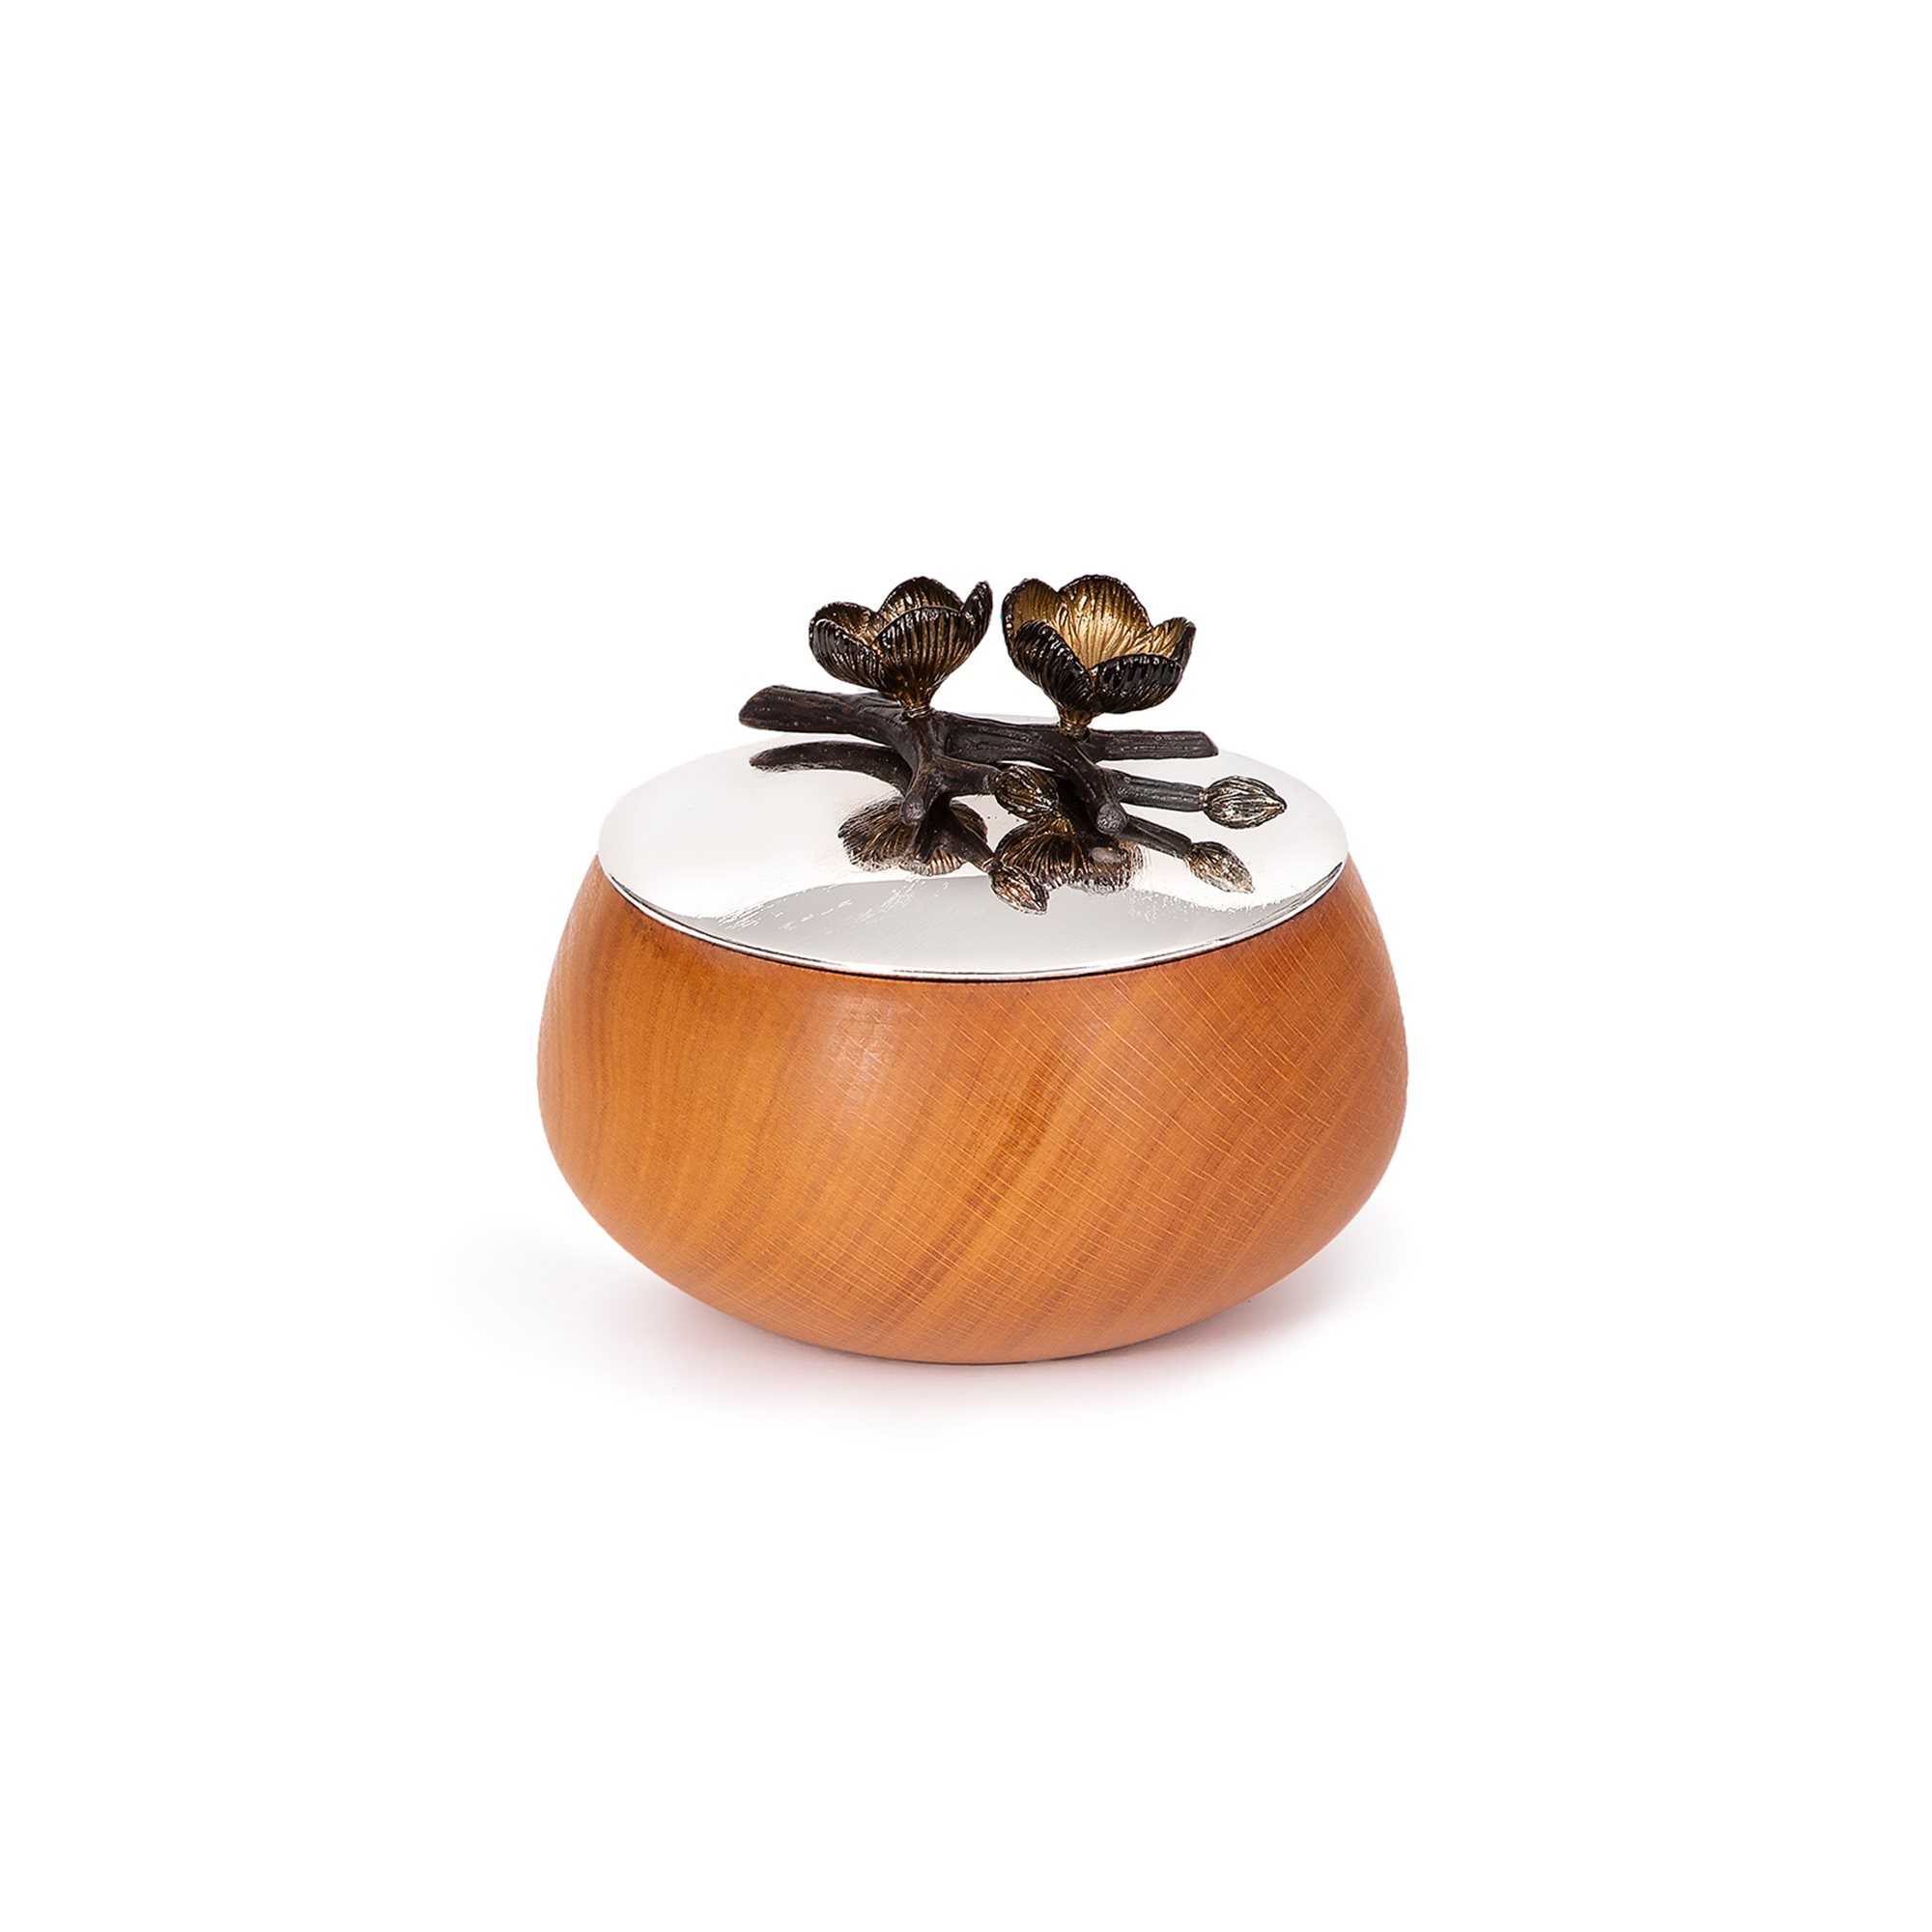 Marina Wood Bowl with Lid (Size Z1)